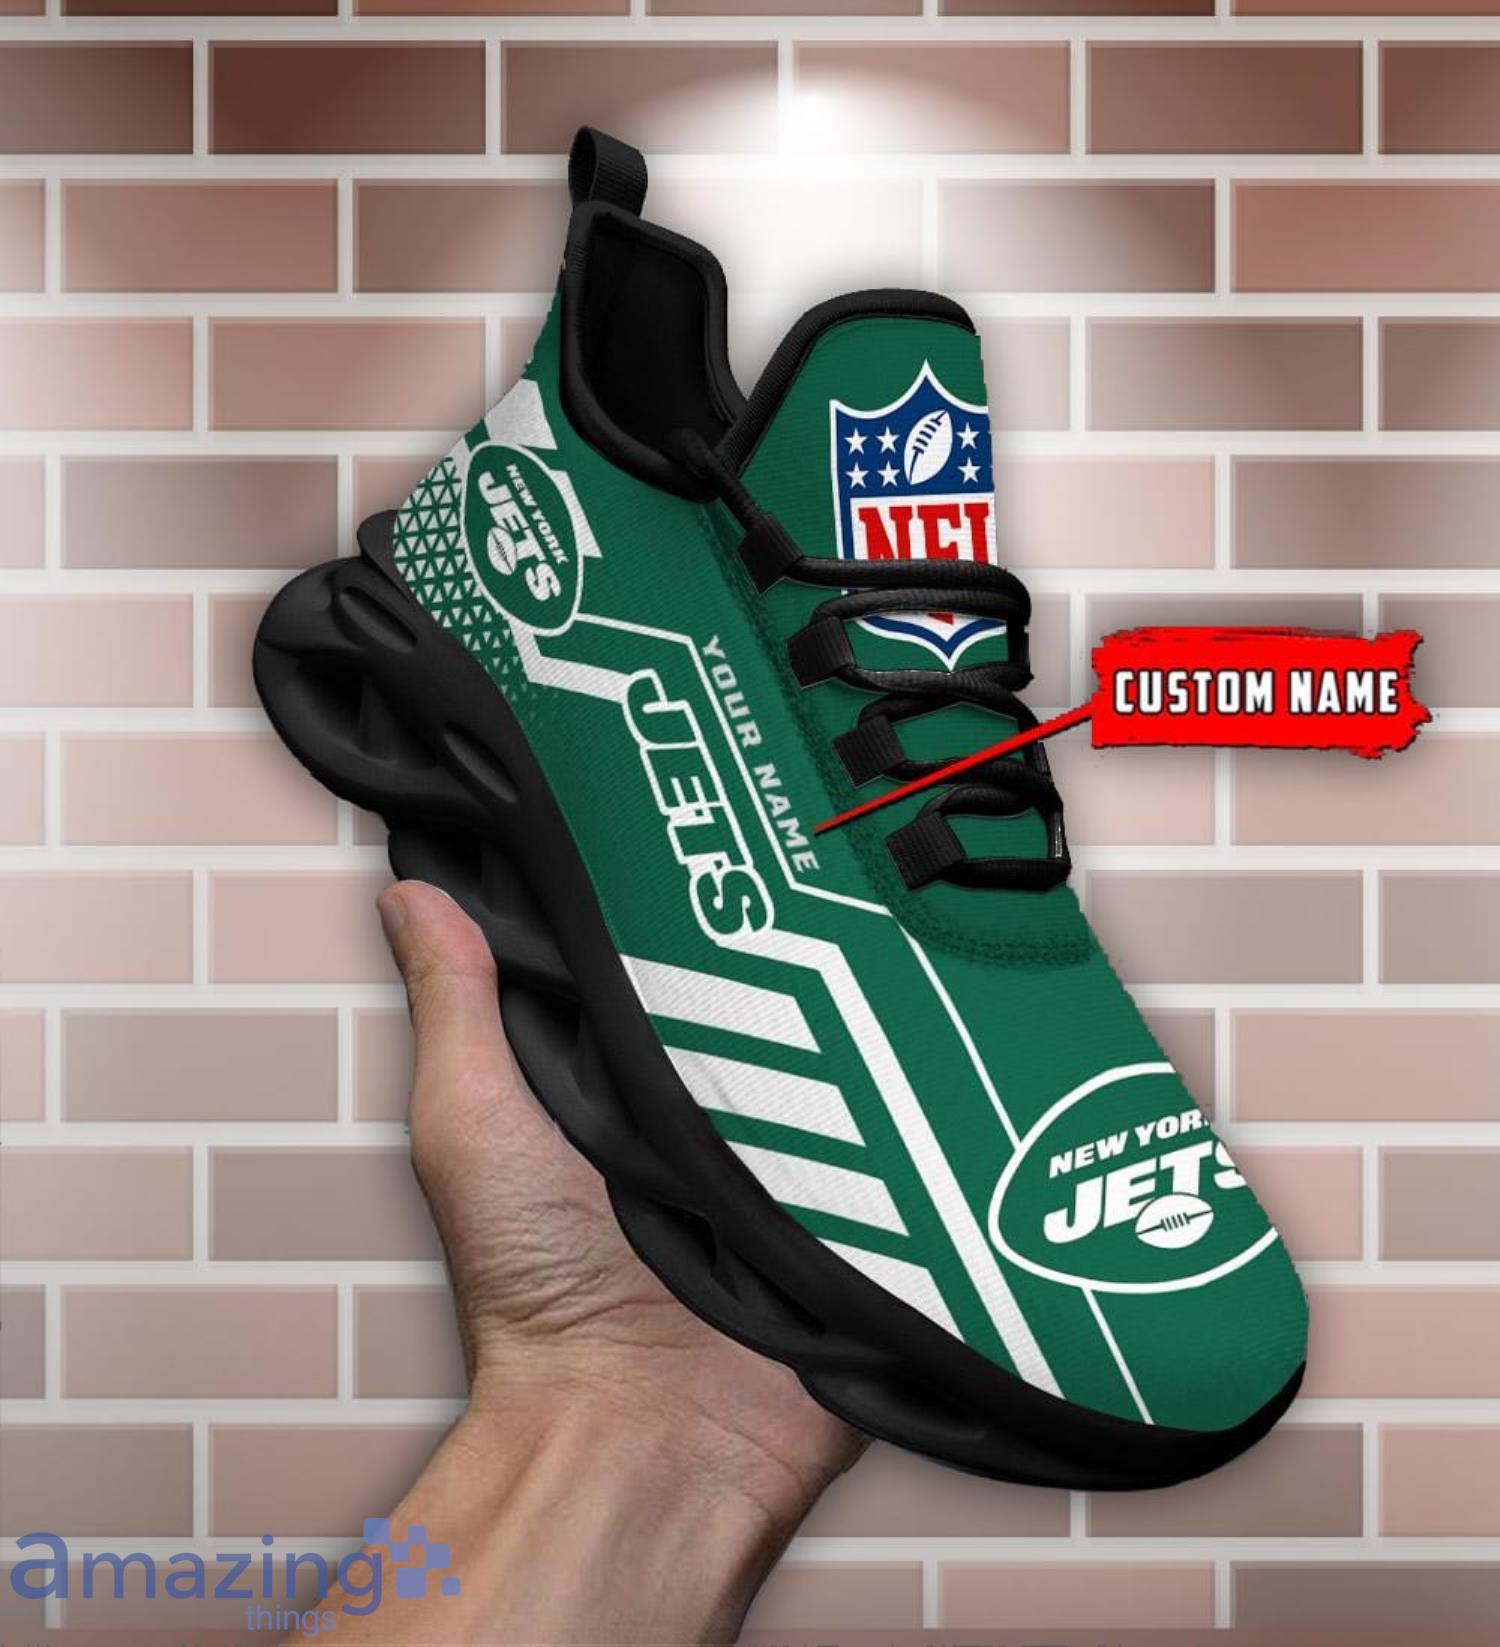 New York Jets NFL Max Soul Shoes Gift For Sport's Fans - Banantees